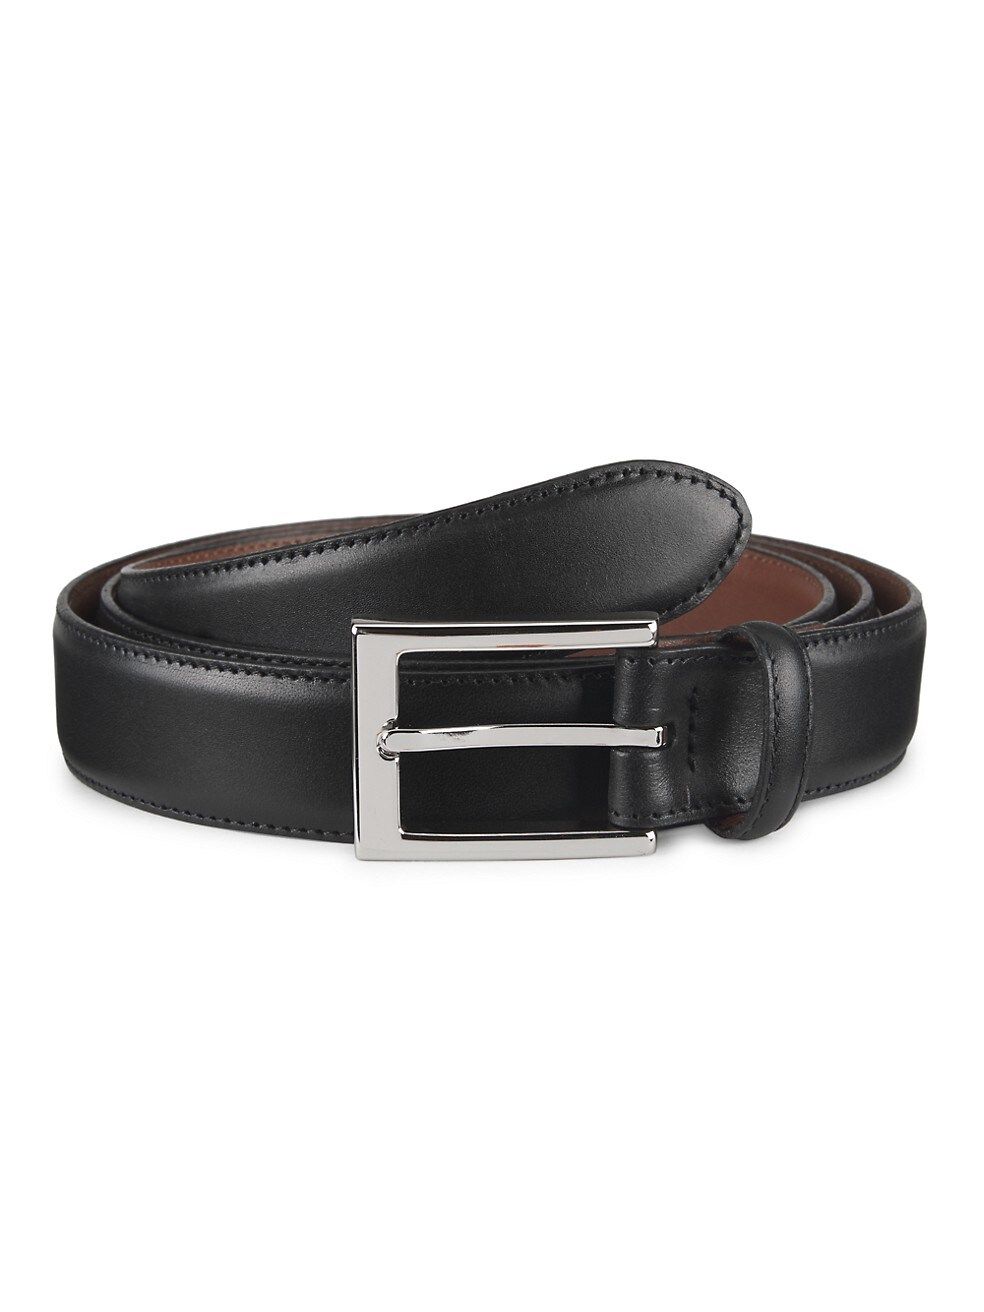 COLLECTION Leather Belt | Saks Fifth Avenue